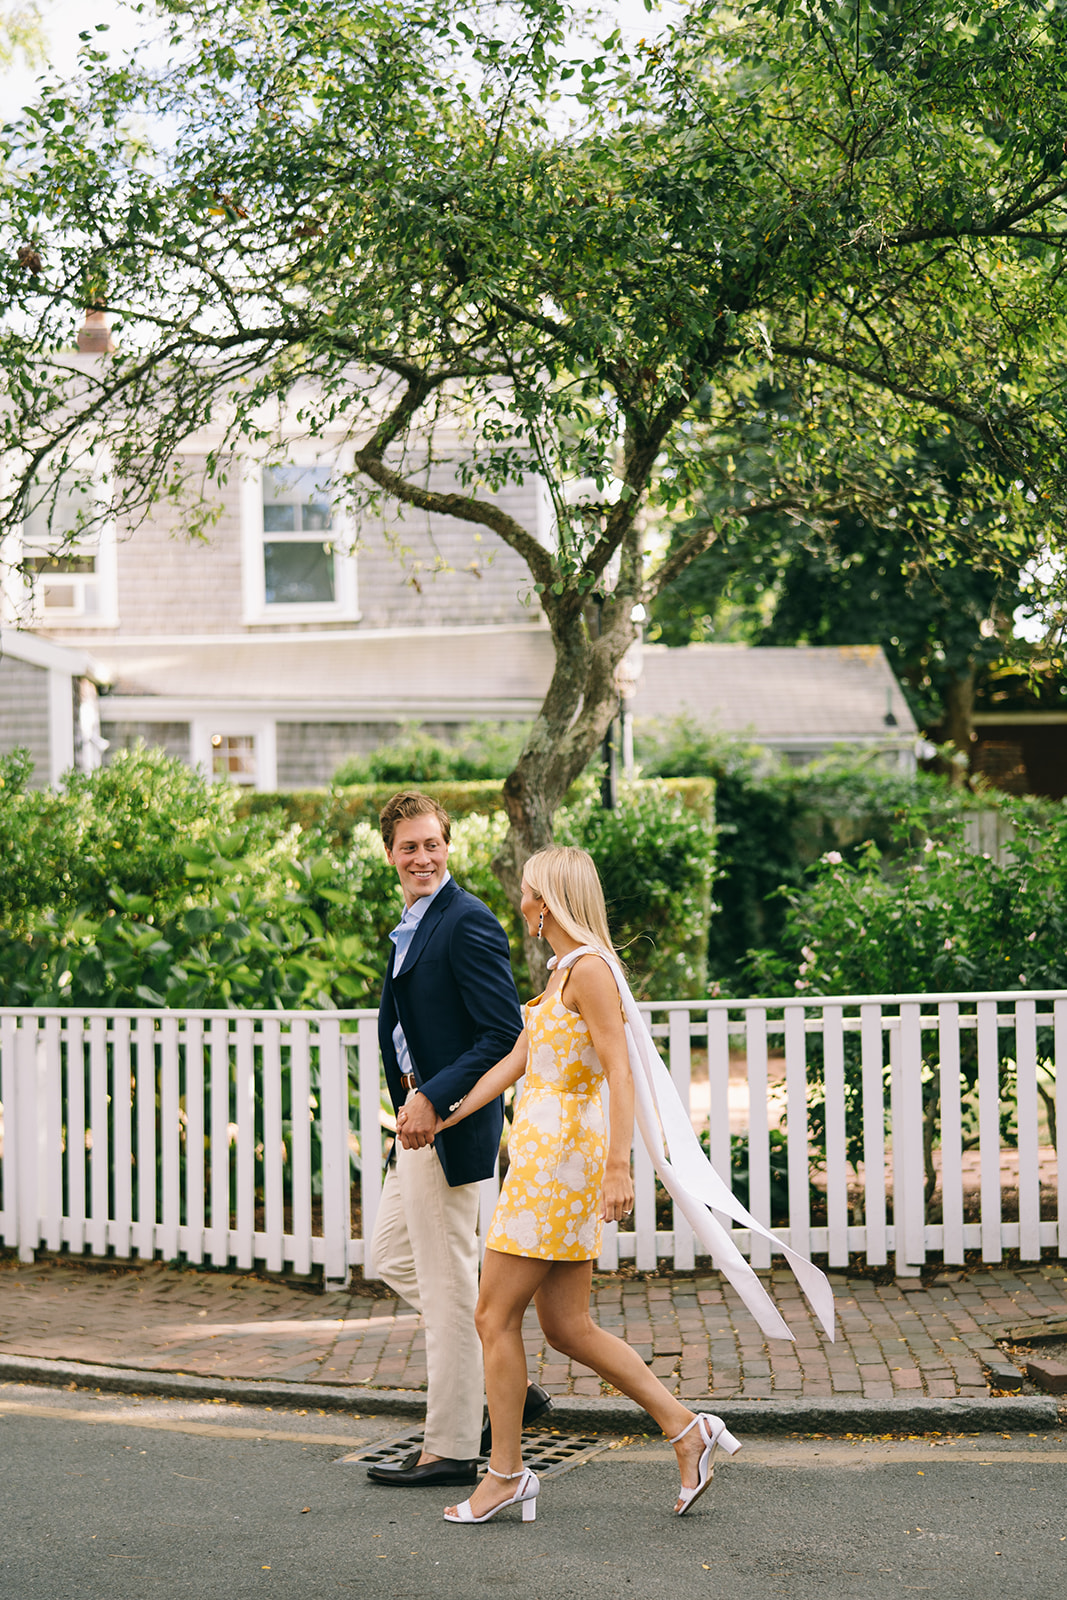 Engaged couple looking at each other smiling as they walk down neighborhood street with trees in the background